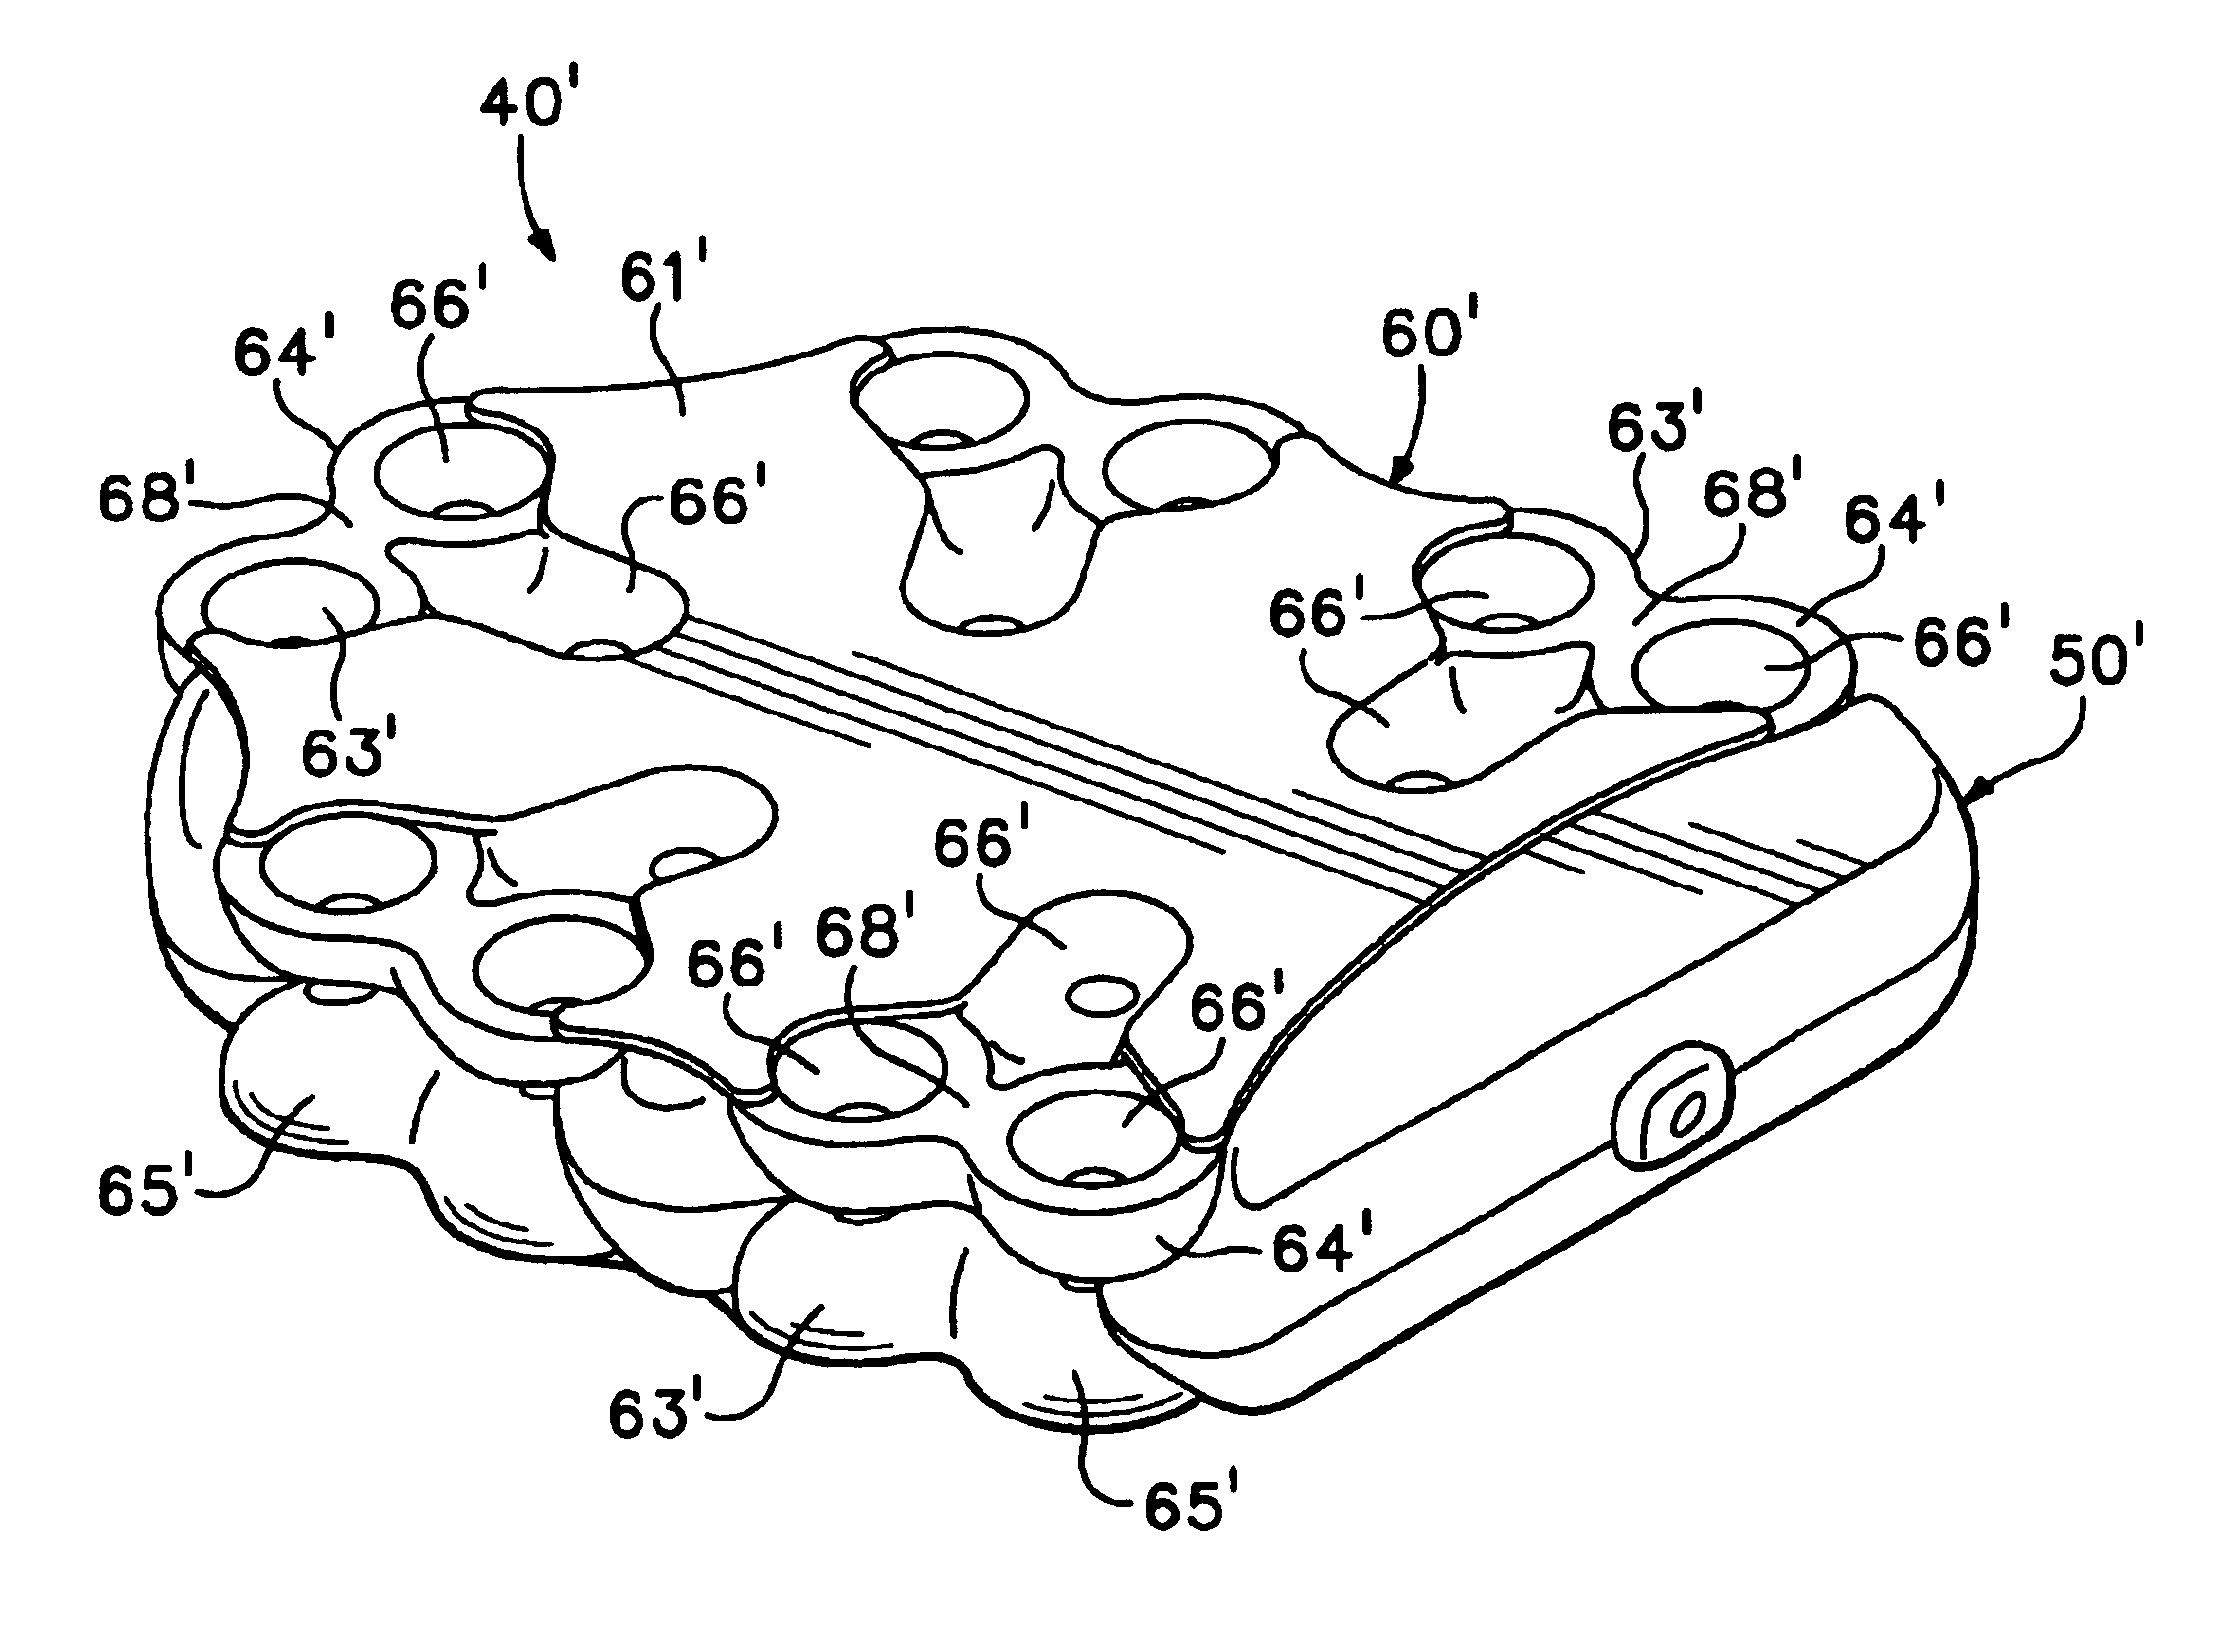 Footwear sole structure incorporating a cushioning component